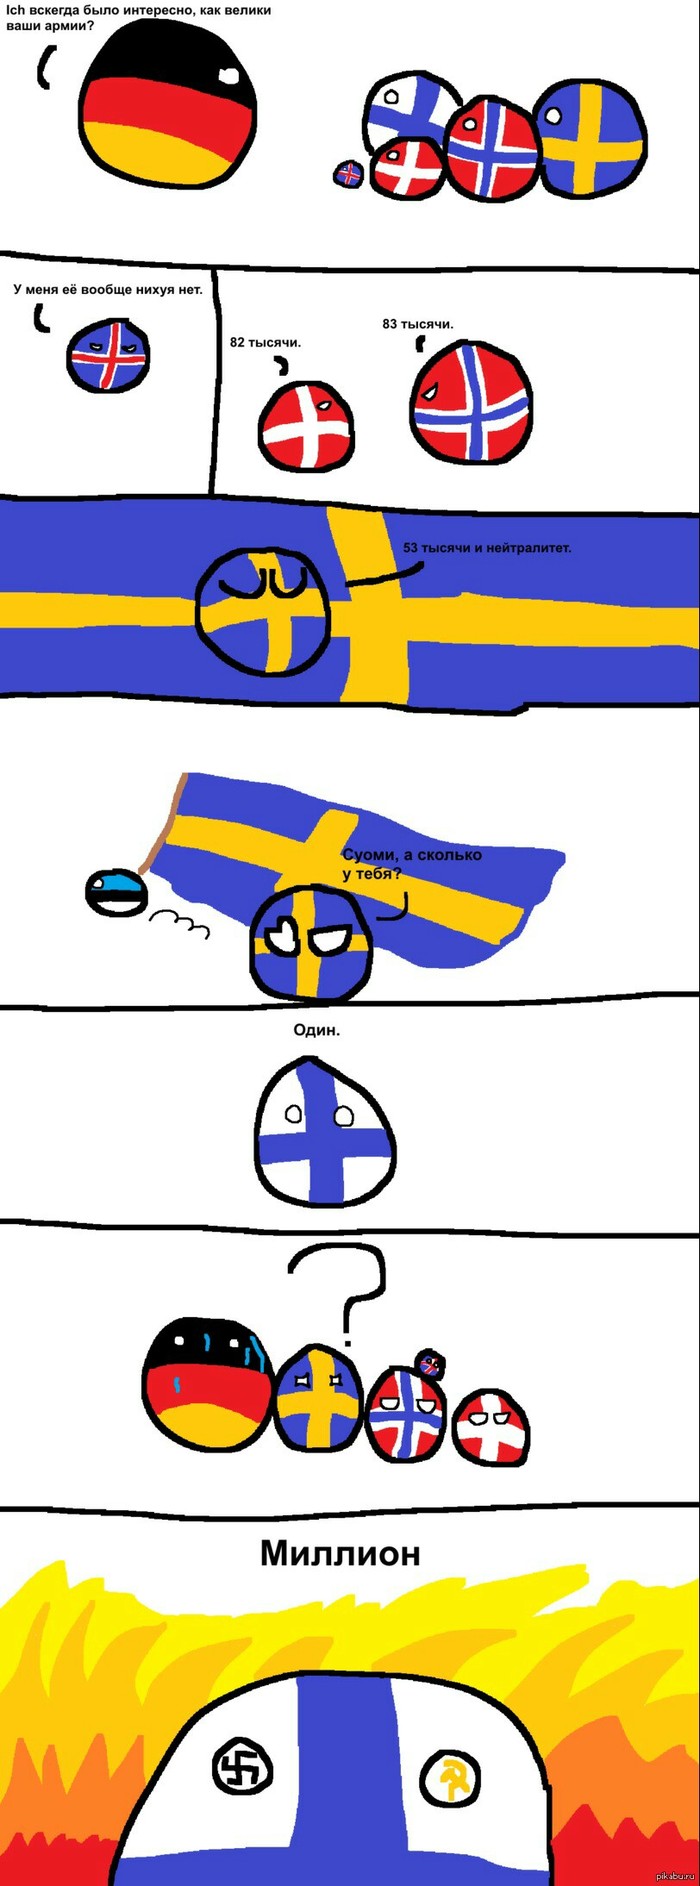 Finnish villages - Countryballs, Germany, Iceland, Norway, Sweden, Finland, Denmark, Army, Longpost